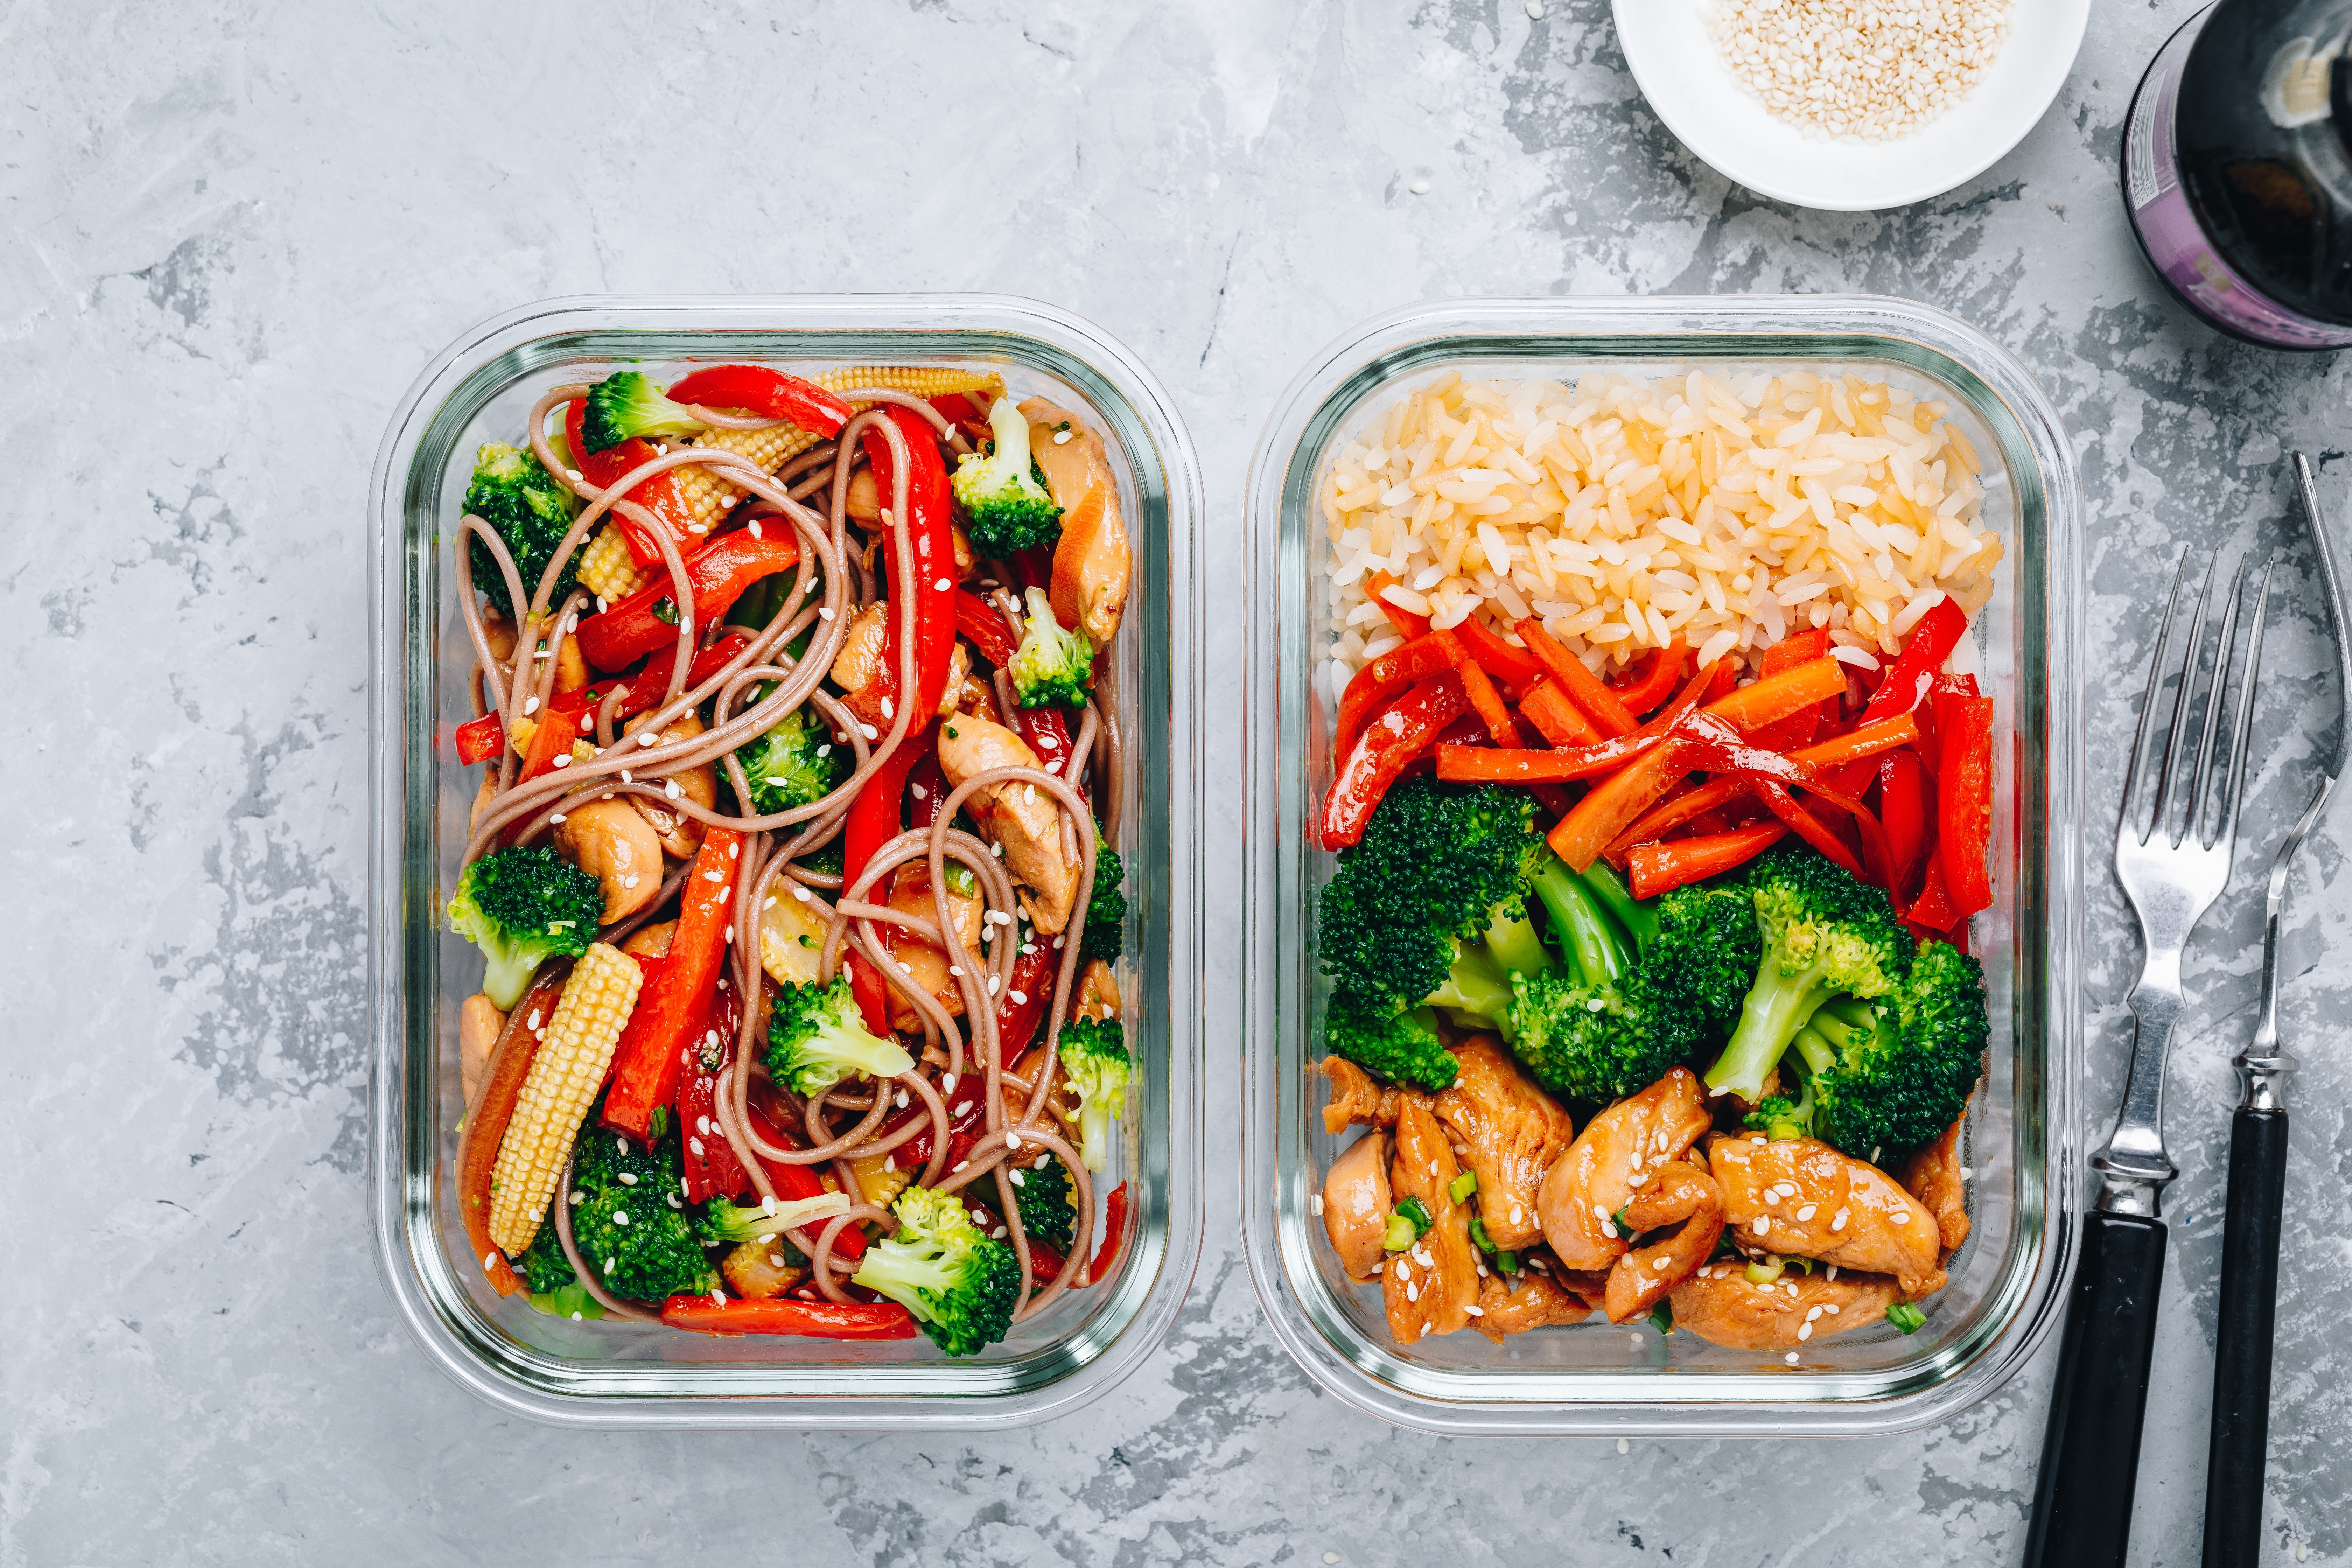 Chicken teriyaki stir fry meal prep lunch box containers with broccoli, carrots, rice or soba noodles